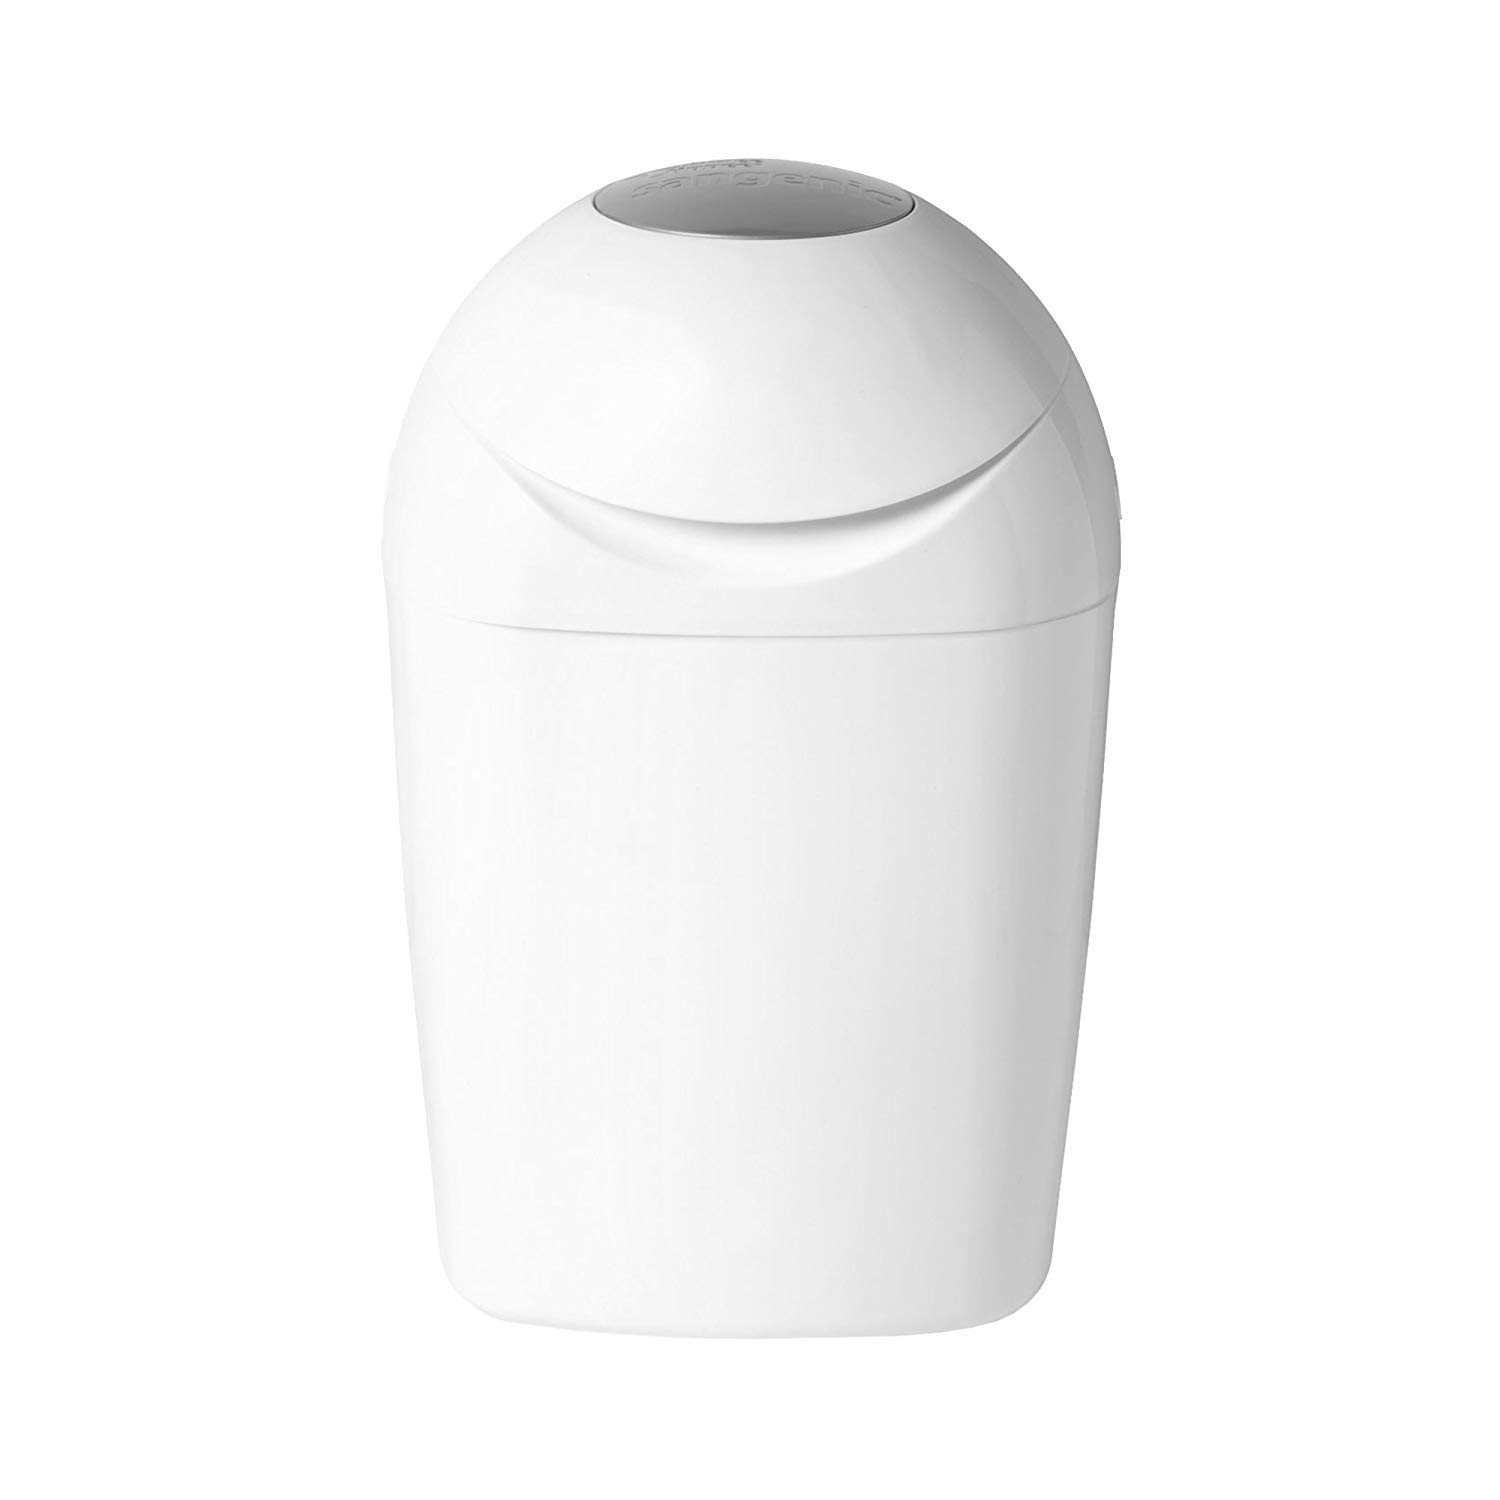 Tommee Tippee Sangenic Hygiene Plus Nappy Disposal